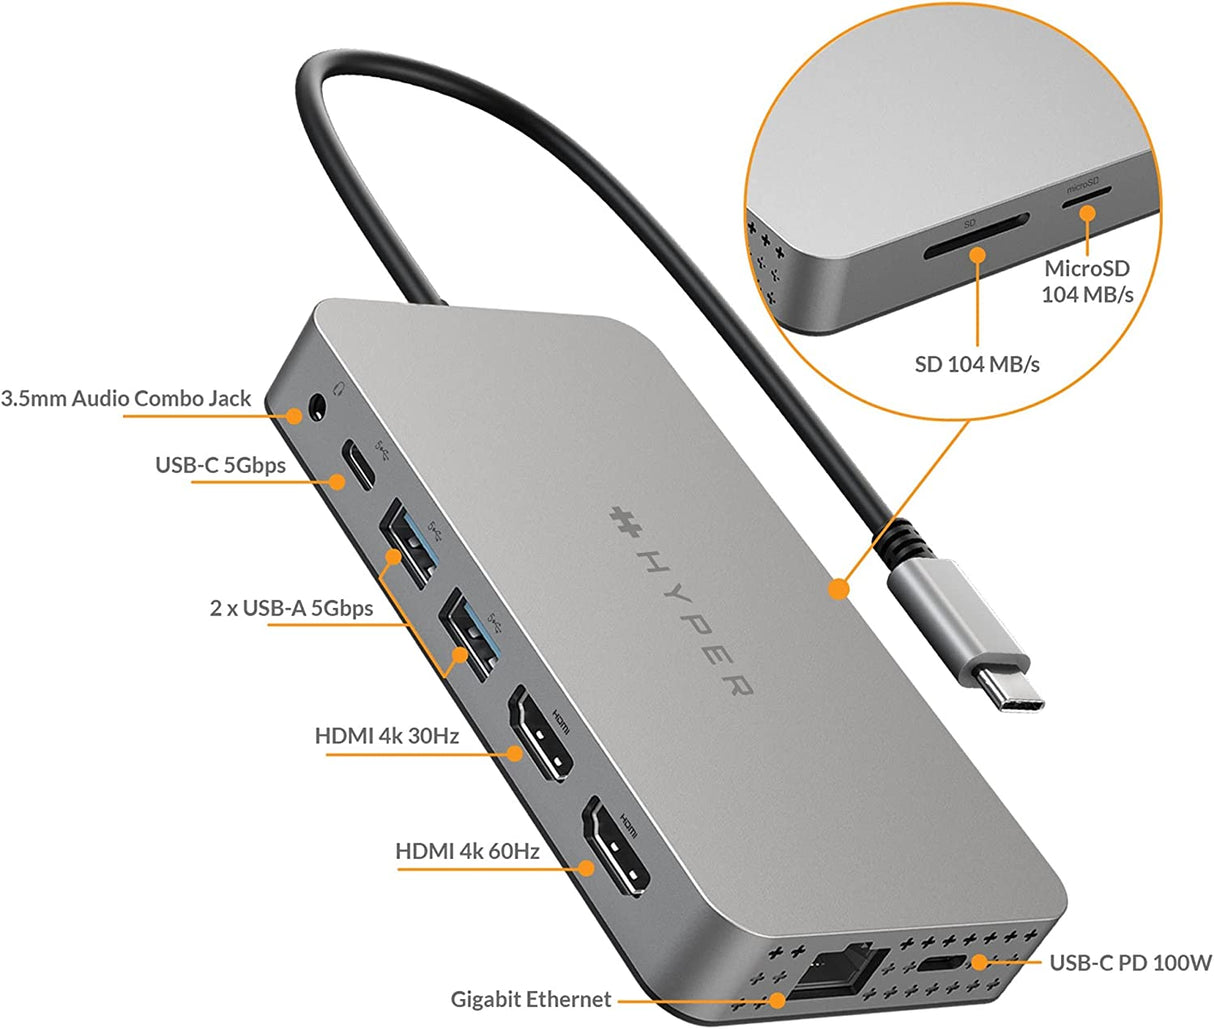 HyperDrive Dual 4K HDMI 10 in 1 USB C hub for MacBook, Windows Laptop, Chromebooks with Type C Ports. Supports 2 Extended Monitors on M1 MacBooks Using HyperDisplay DUAL 4K HDMI 10 in 1 Grey